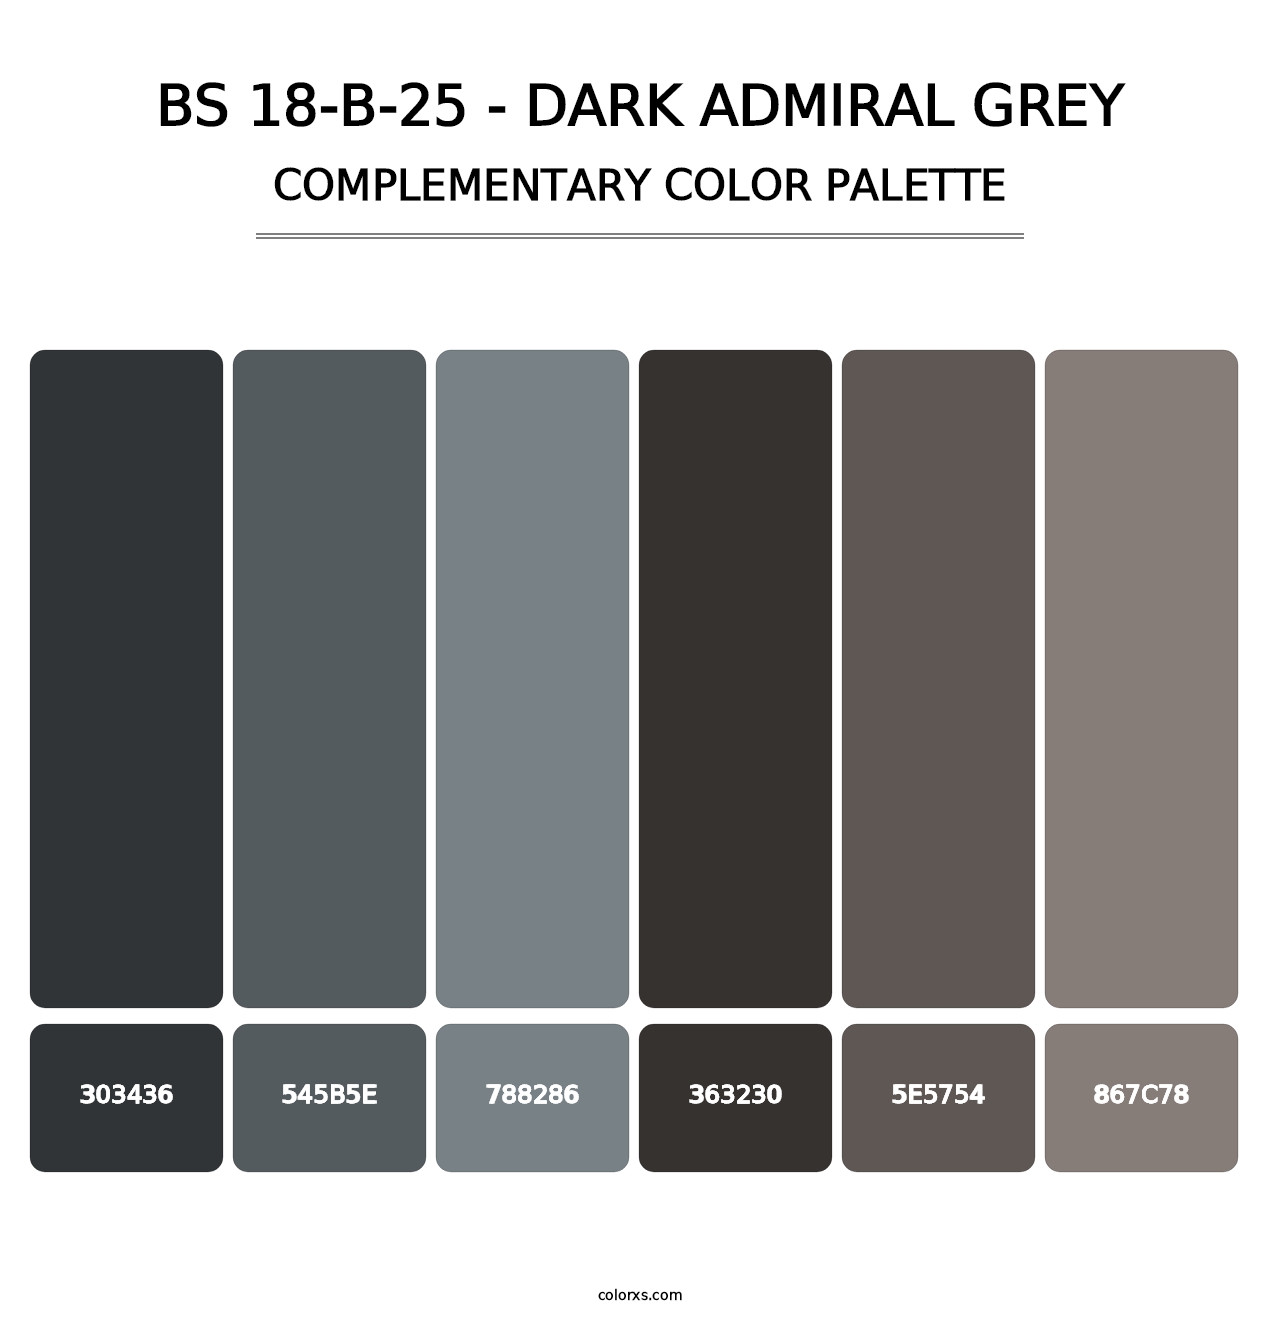 BS 18-B-25 - Dark Admiral Grey - Complementary Color Palette